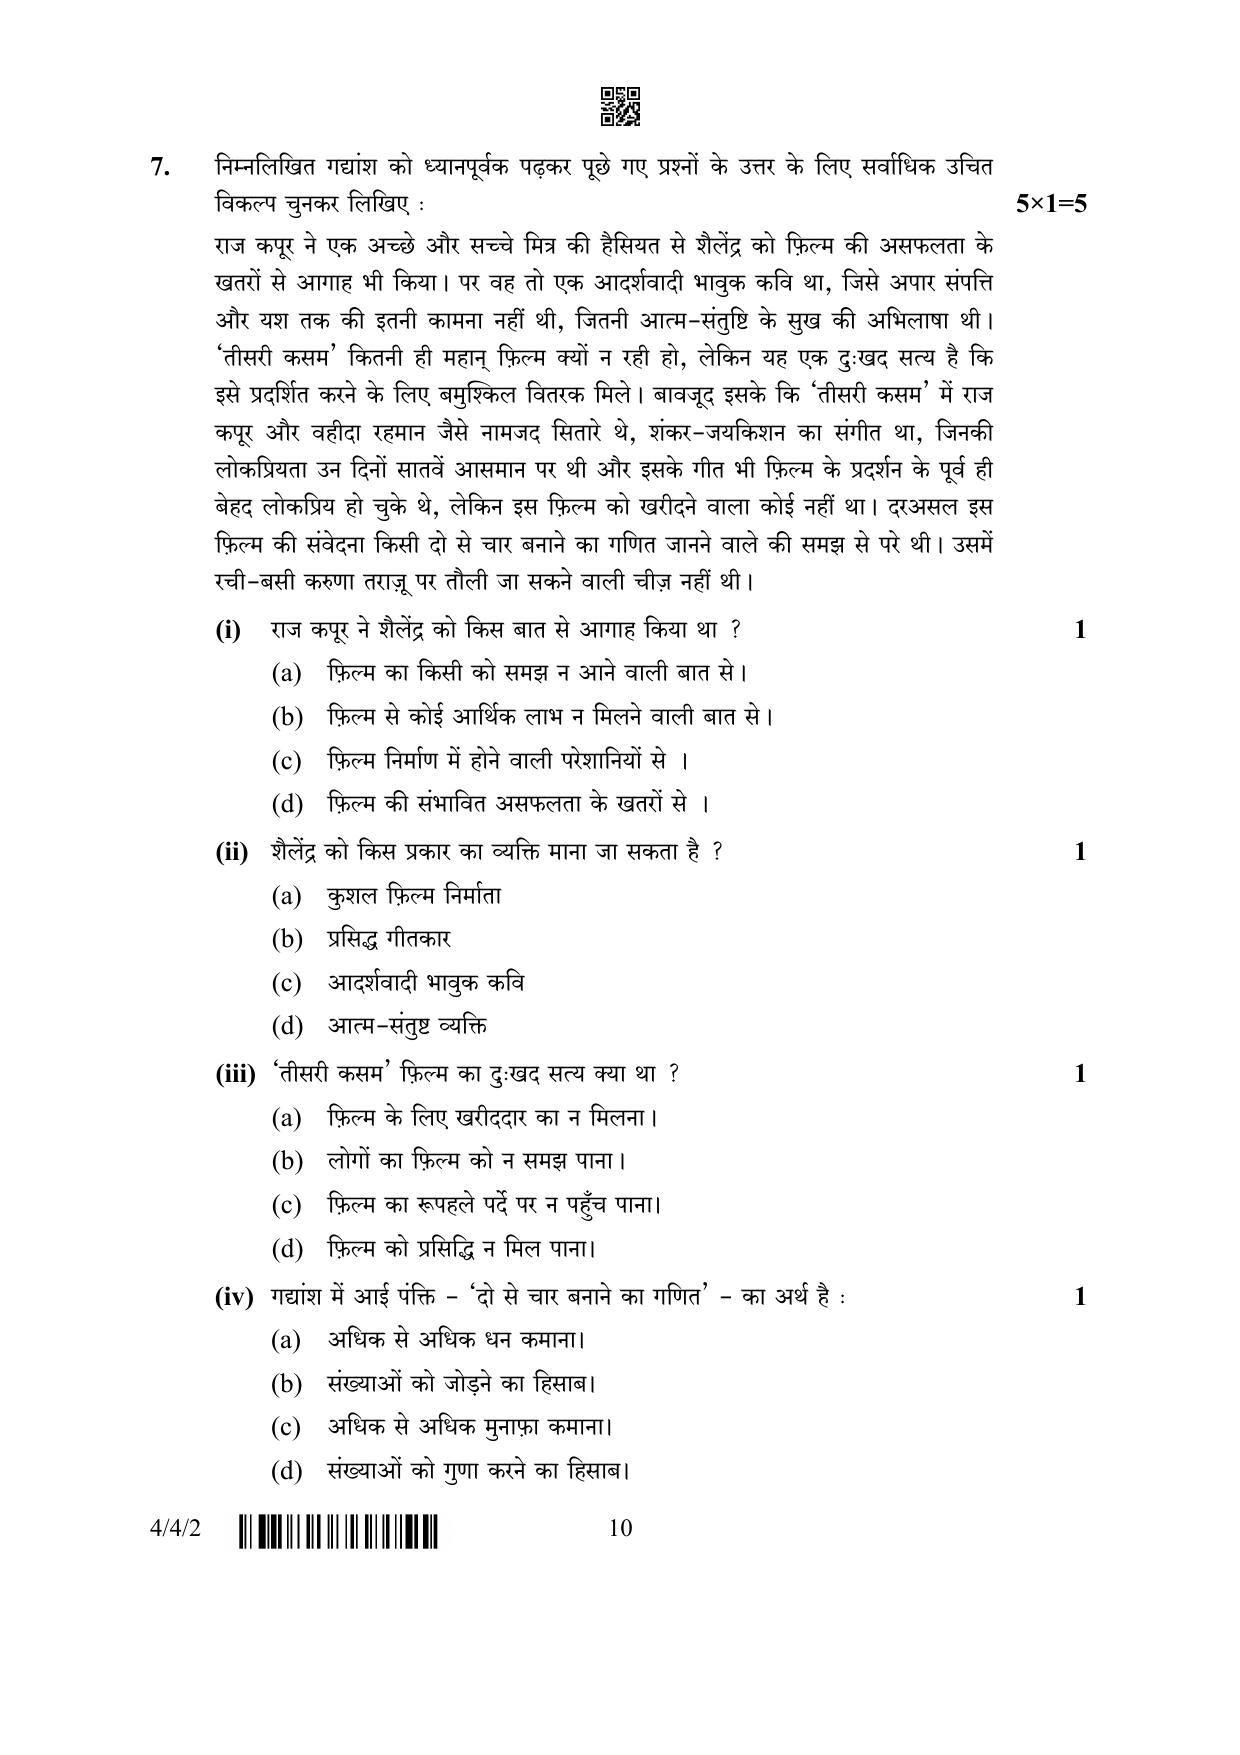 CBSE Class 10 4-4-2 Hindi B 2023 Question Paper - Page 10